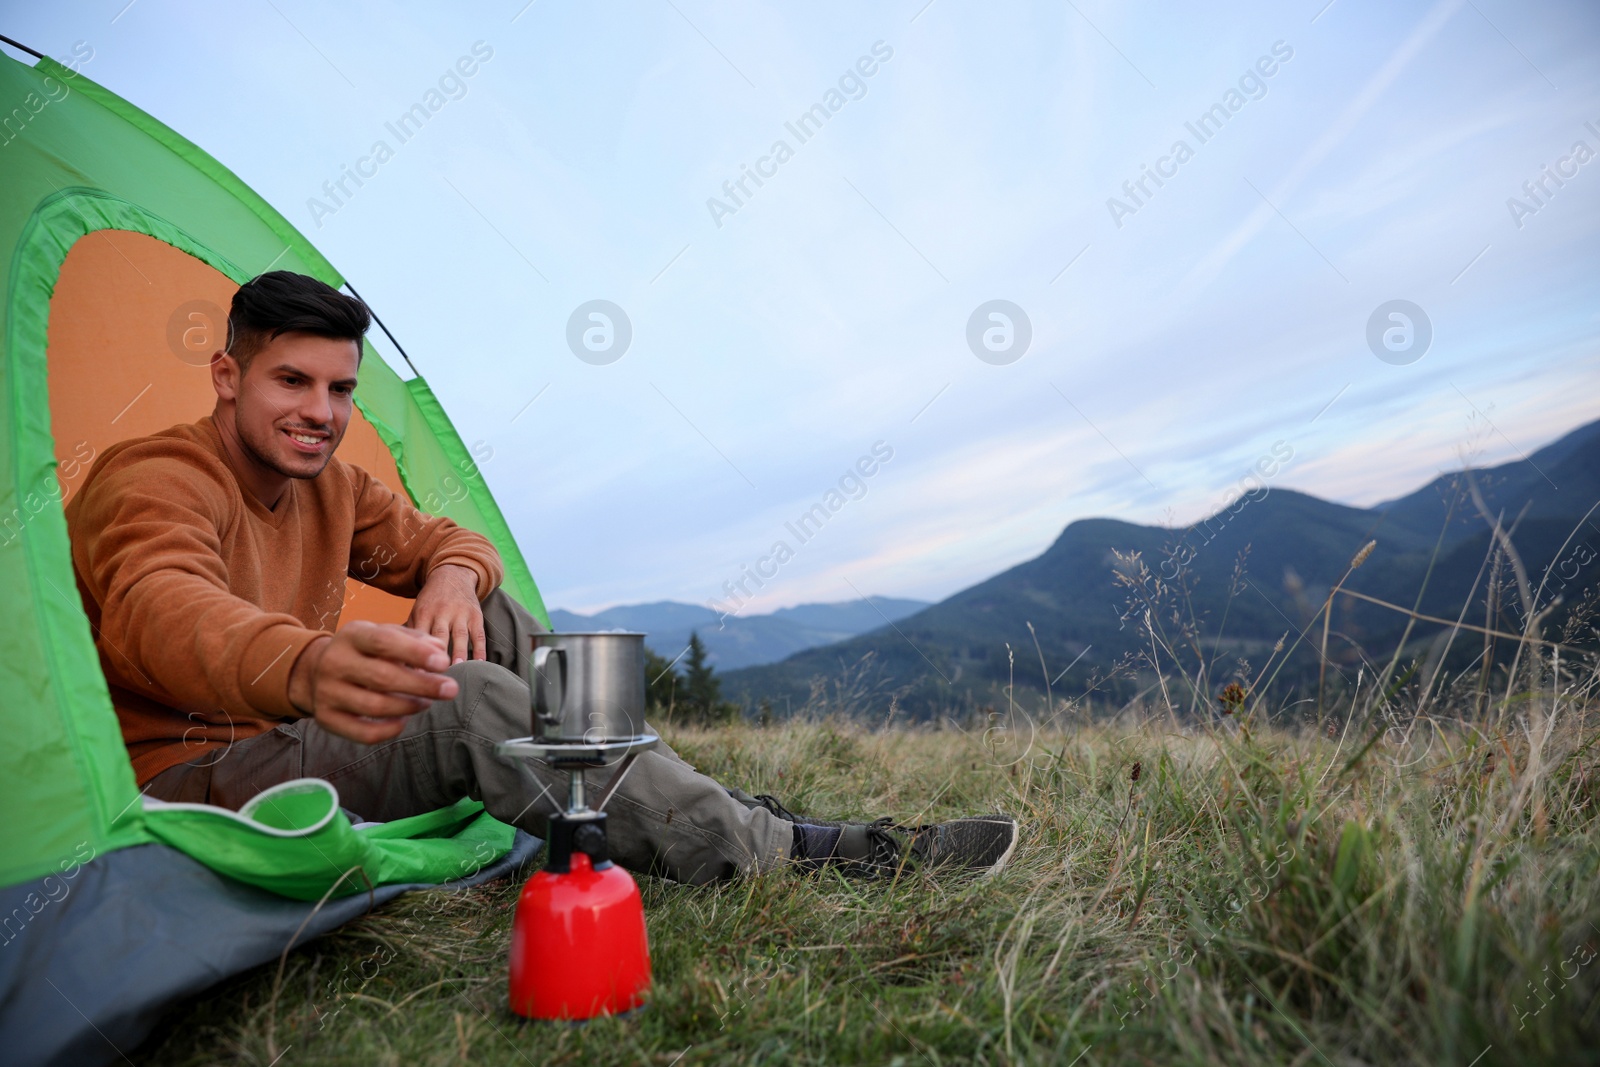 Photo of Man taking cup off stove while sitting in camping tent outdoors